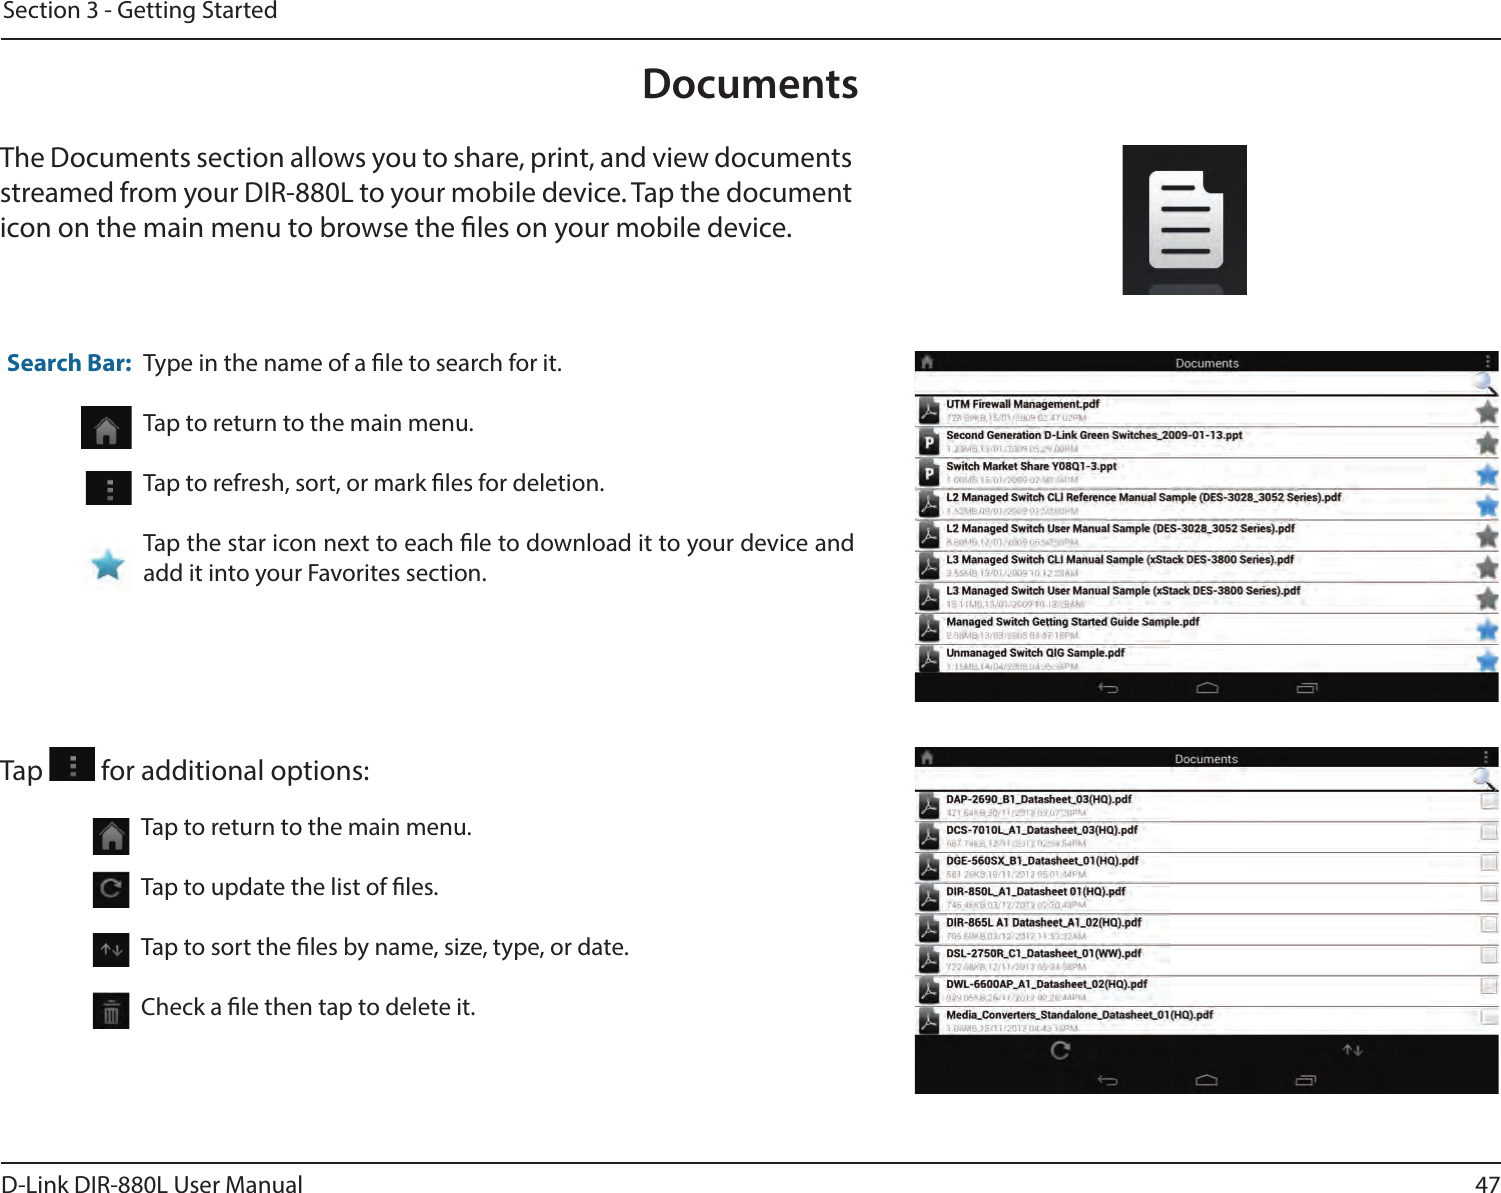 47D-Link DIR-880L User ManualSection 3 - Getting StartedDocumentsThe Documents section allows you to share, print, and view documents streamed from your DIR-880L to your mobile device. Tap the document icon on the main menu to browse the les on your mobile device.Type in the name of a le to search for it.Tap to return to the main menu.Tap to refresh, sort, or mark les for deletion.Tap the star icon next to each le to download it to your device and add it into your Favorites section.Search Bar:Tap   for additional options:Tap to return to the main menu.Tap to update the list of les.Tap to sort the les by name, size, type, or date.Check a le then tap to delete it.